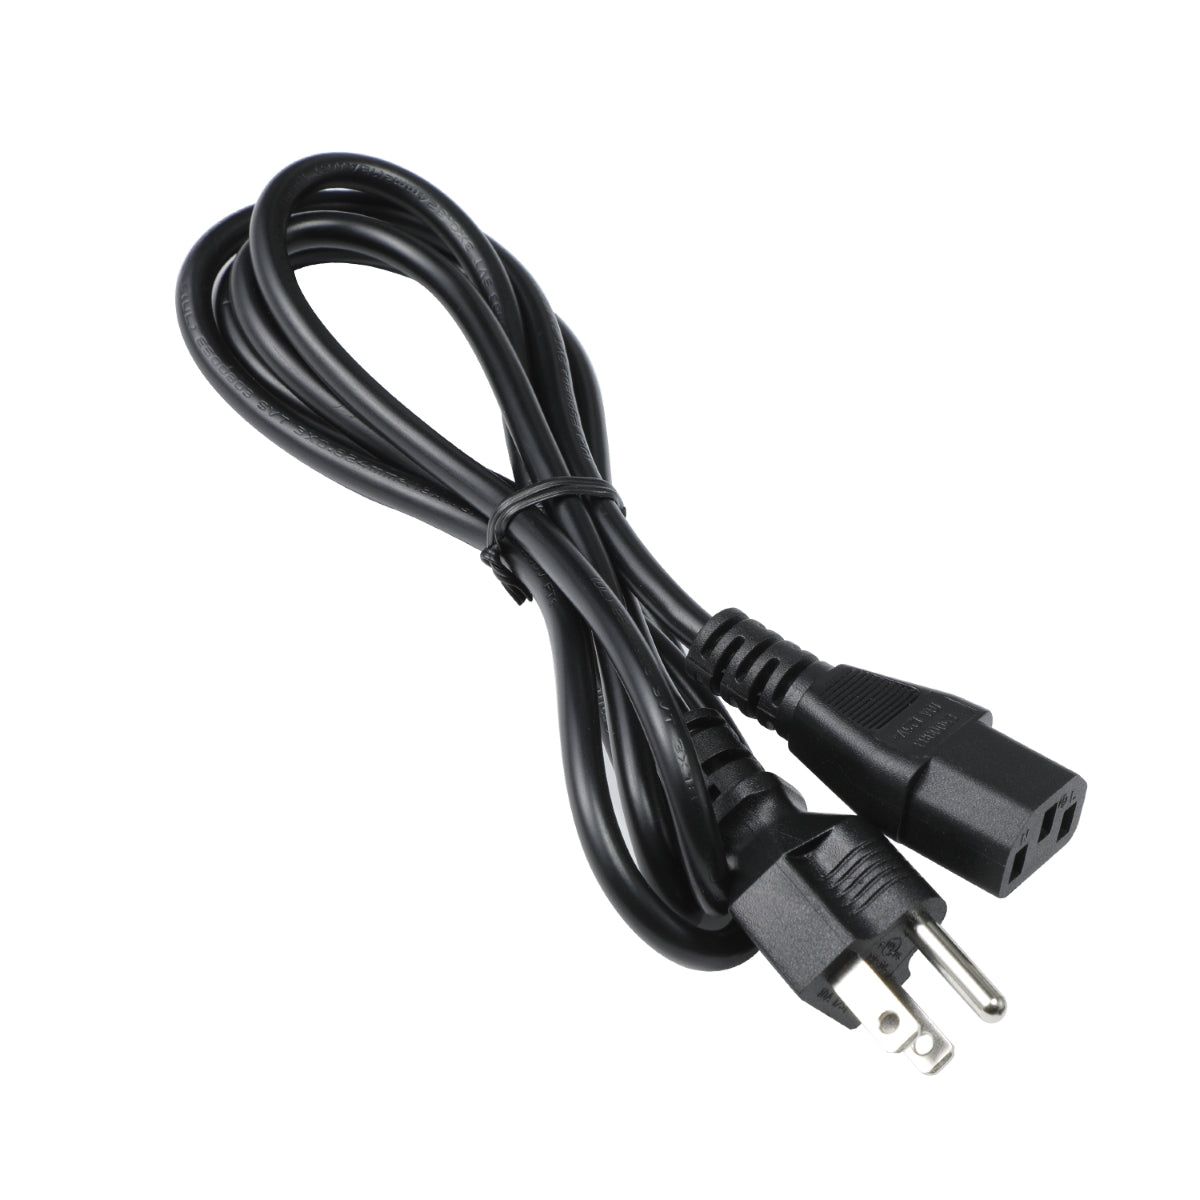 Power Cord for ASUS VG248QE Monitor.